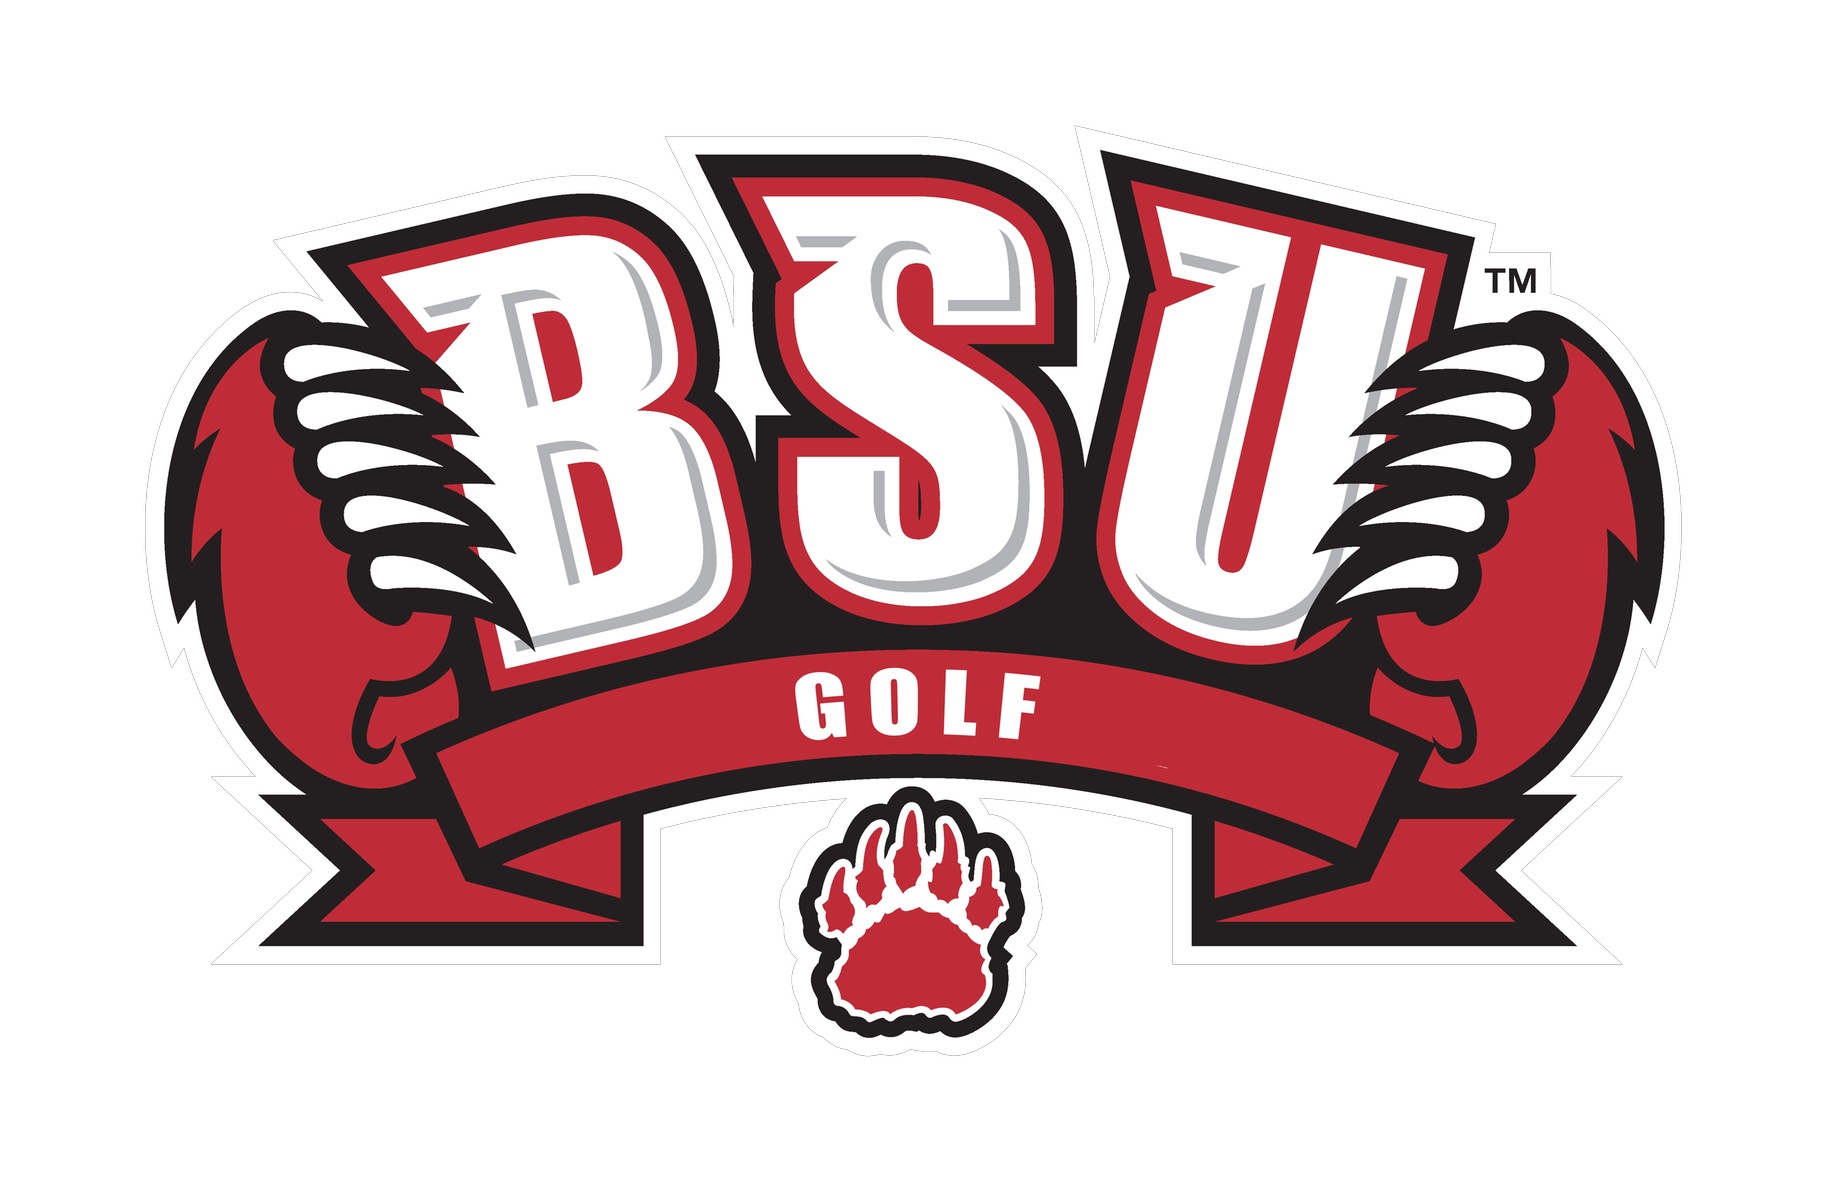 Interested in joining the BSU Golf Club?